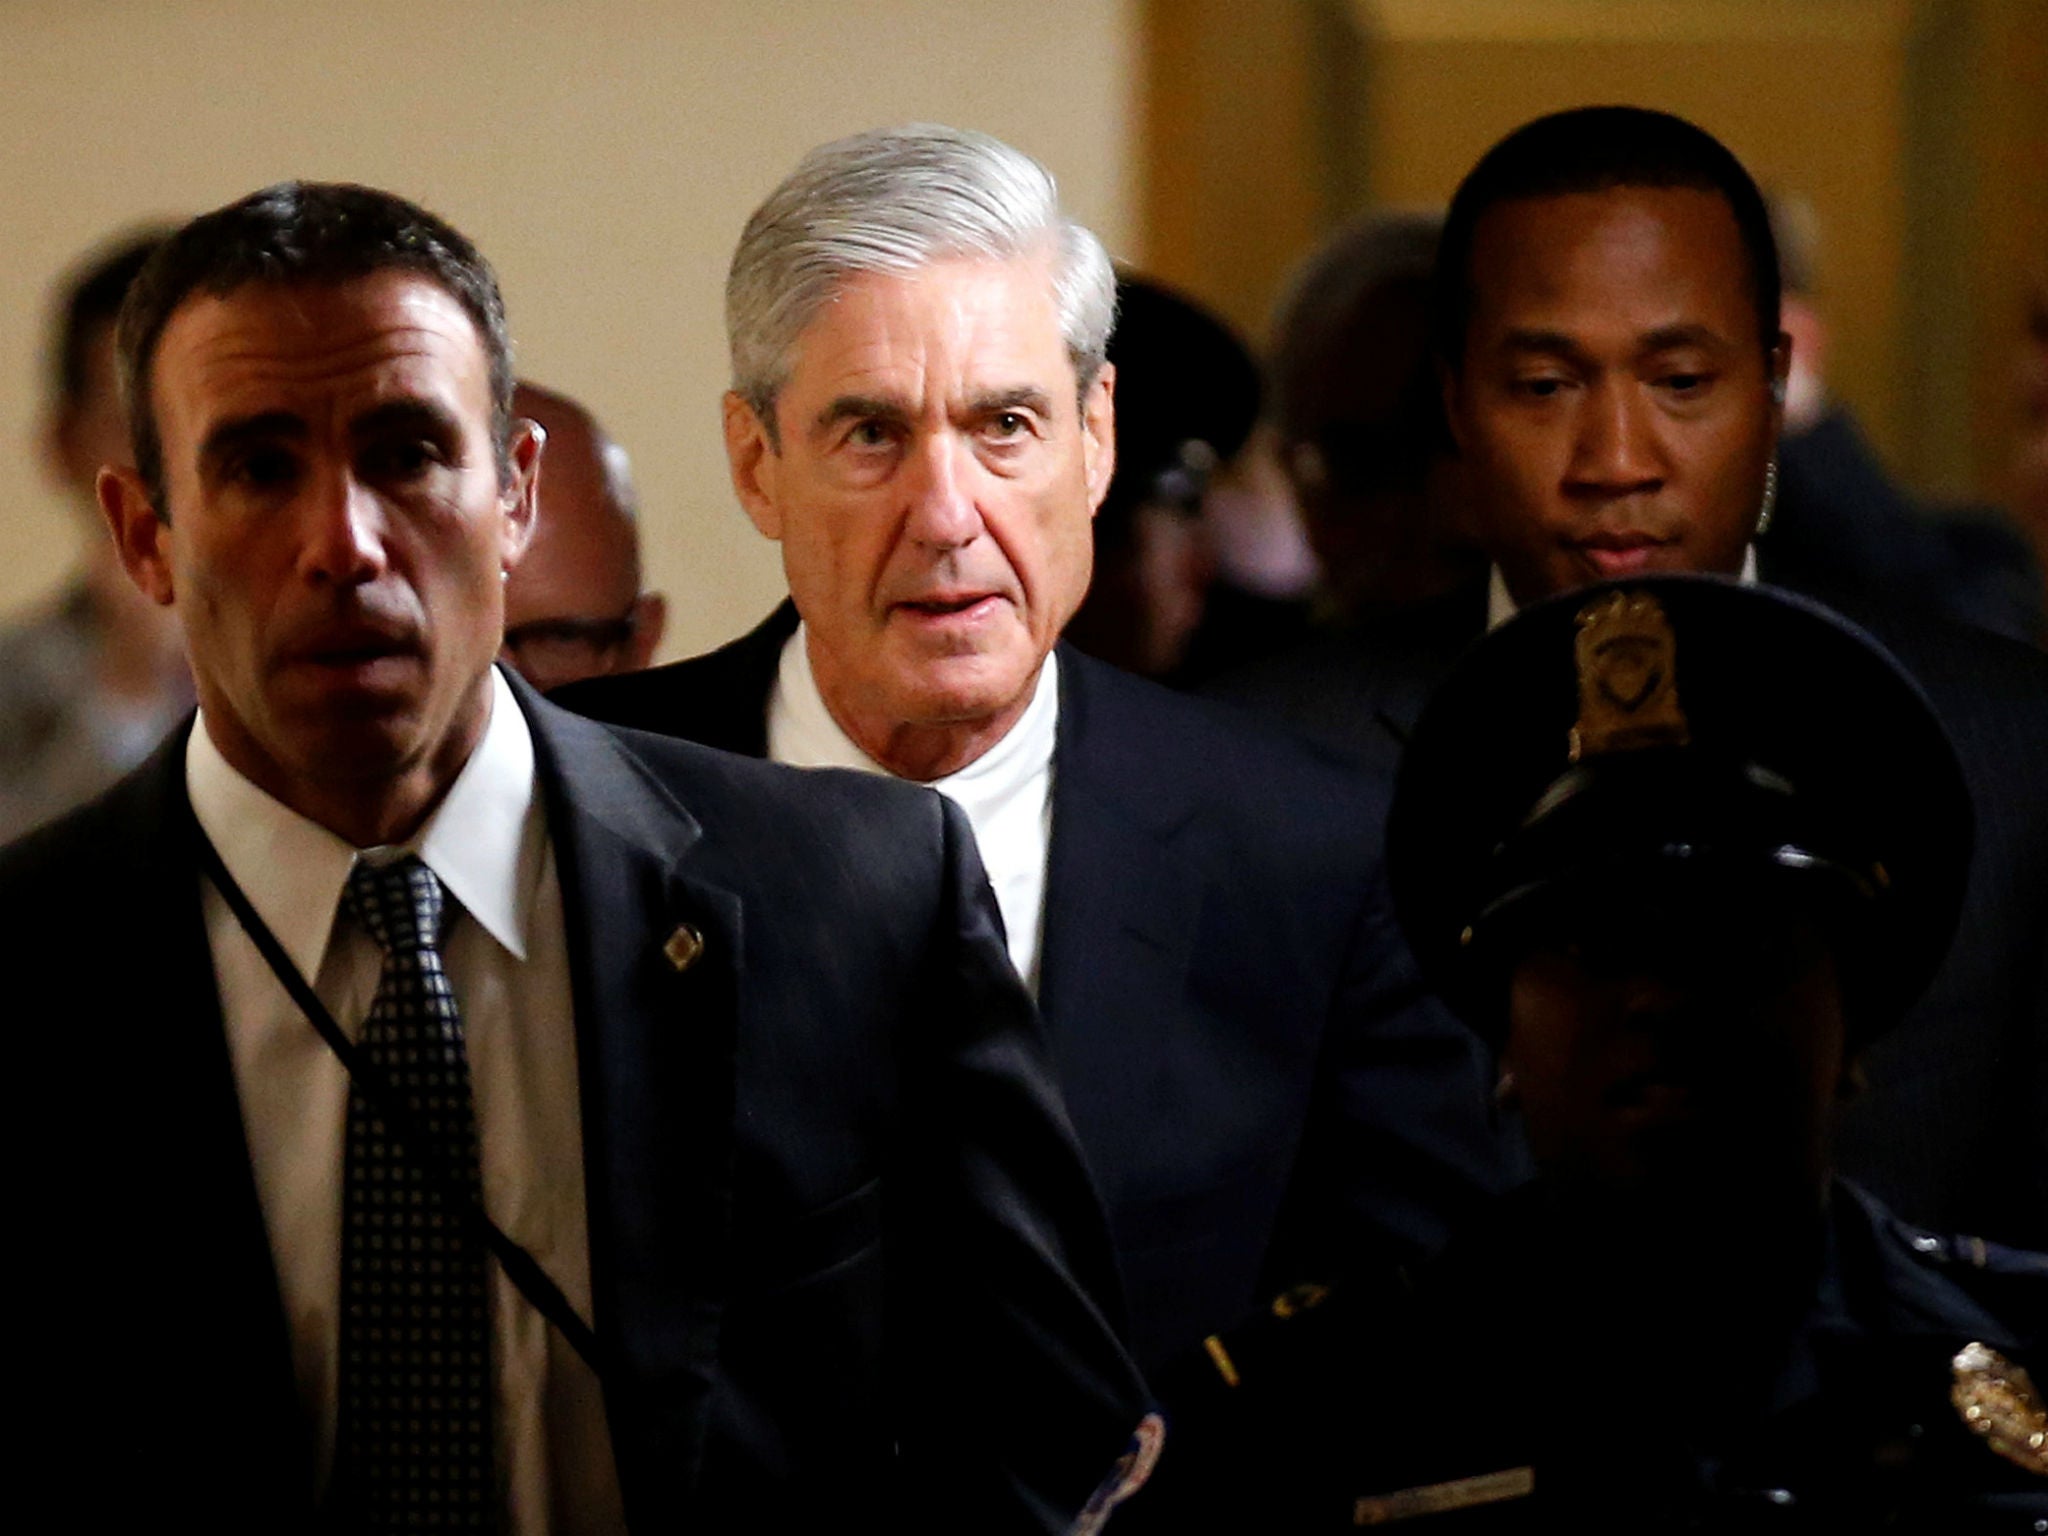 Special counsel Robert Mueller is investigating allegations of collusion between the Trump campaign and Russia